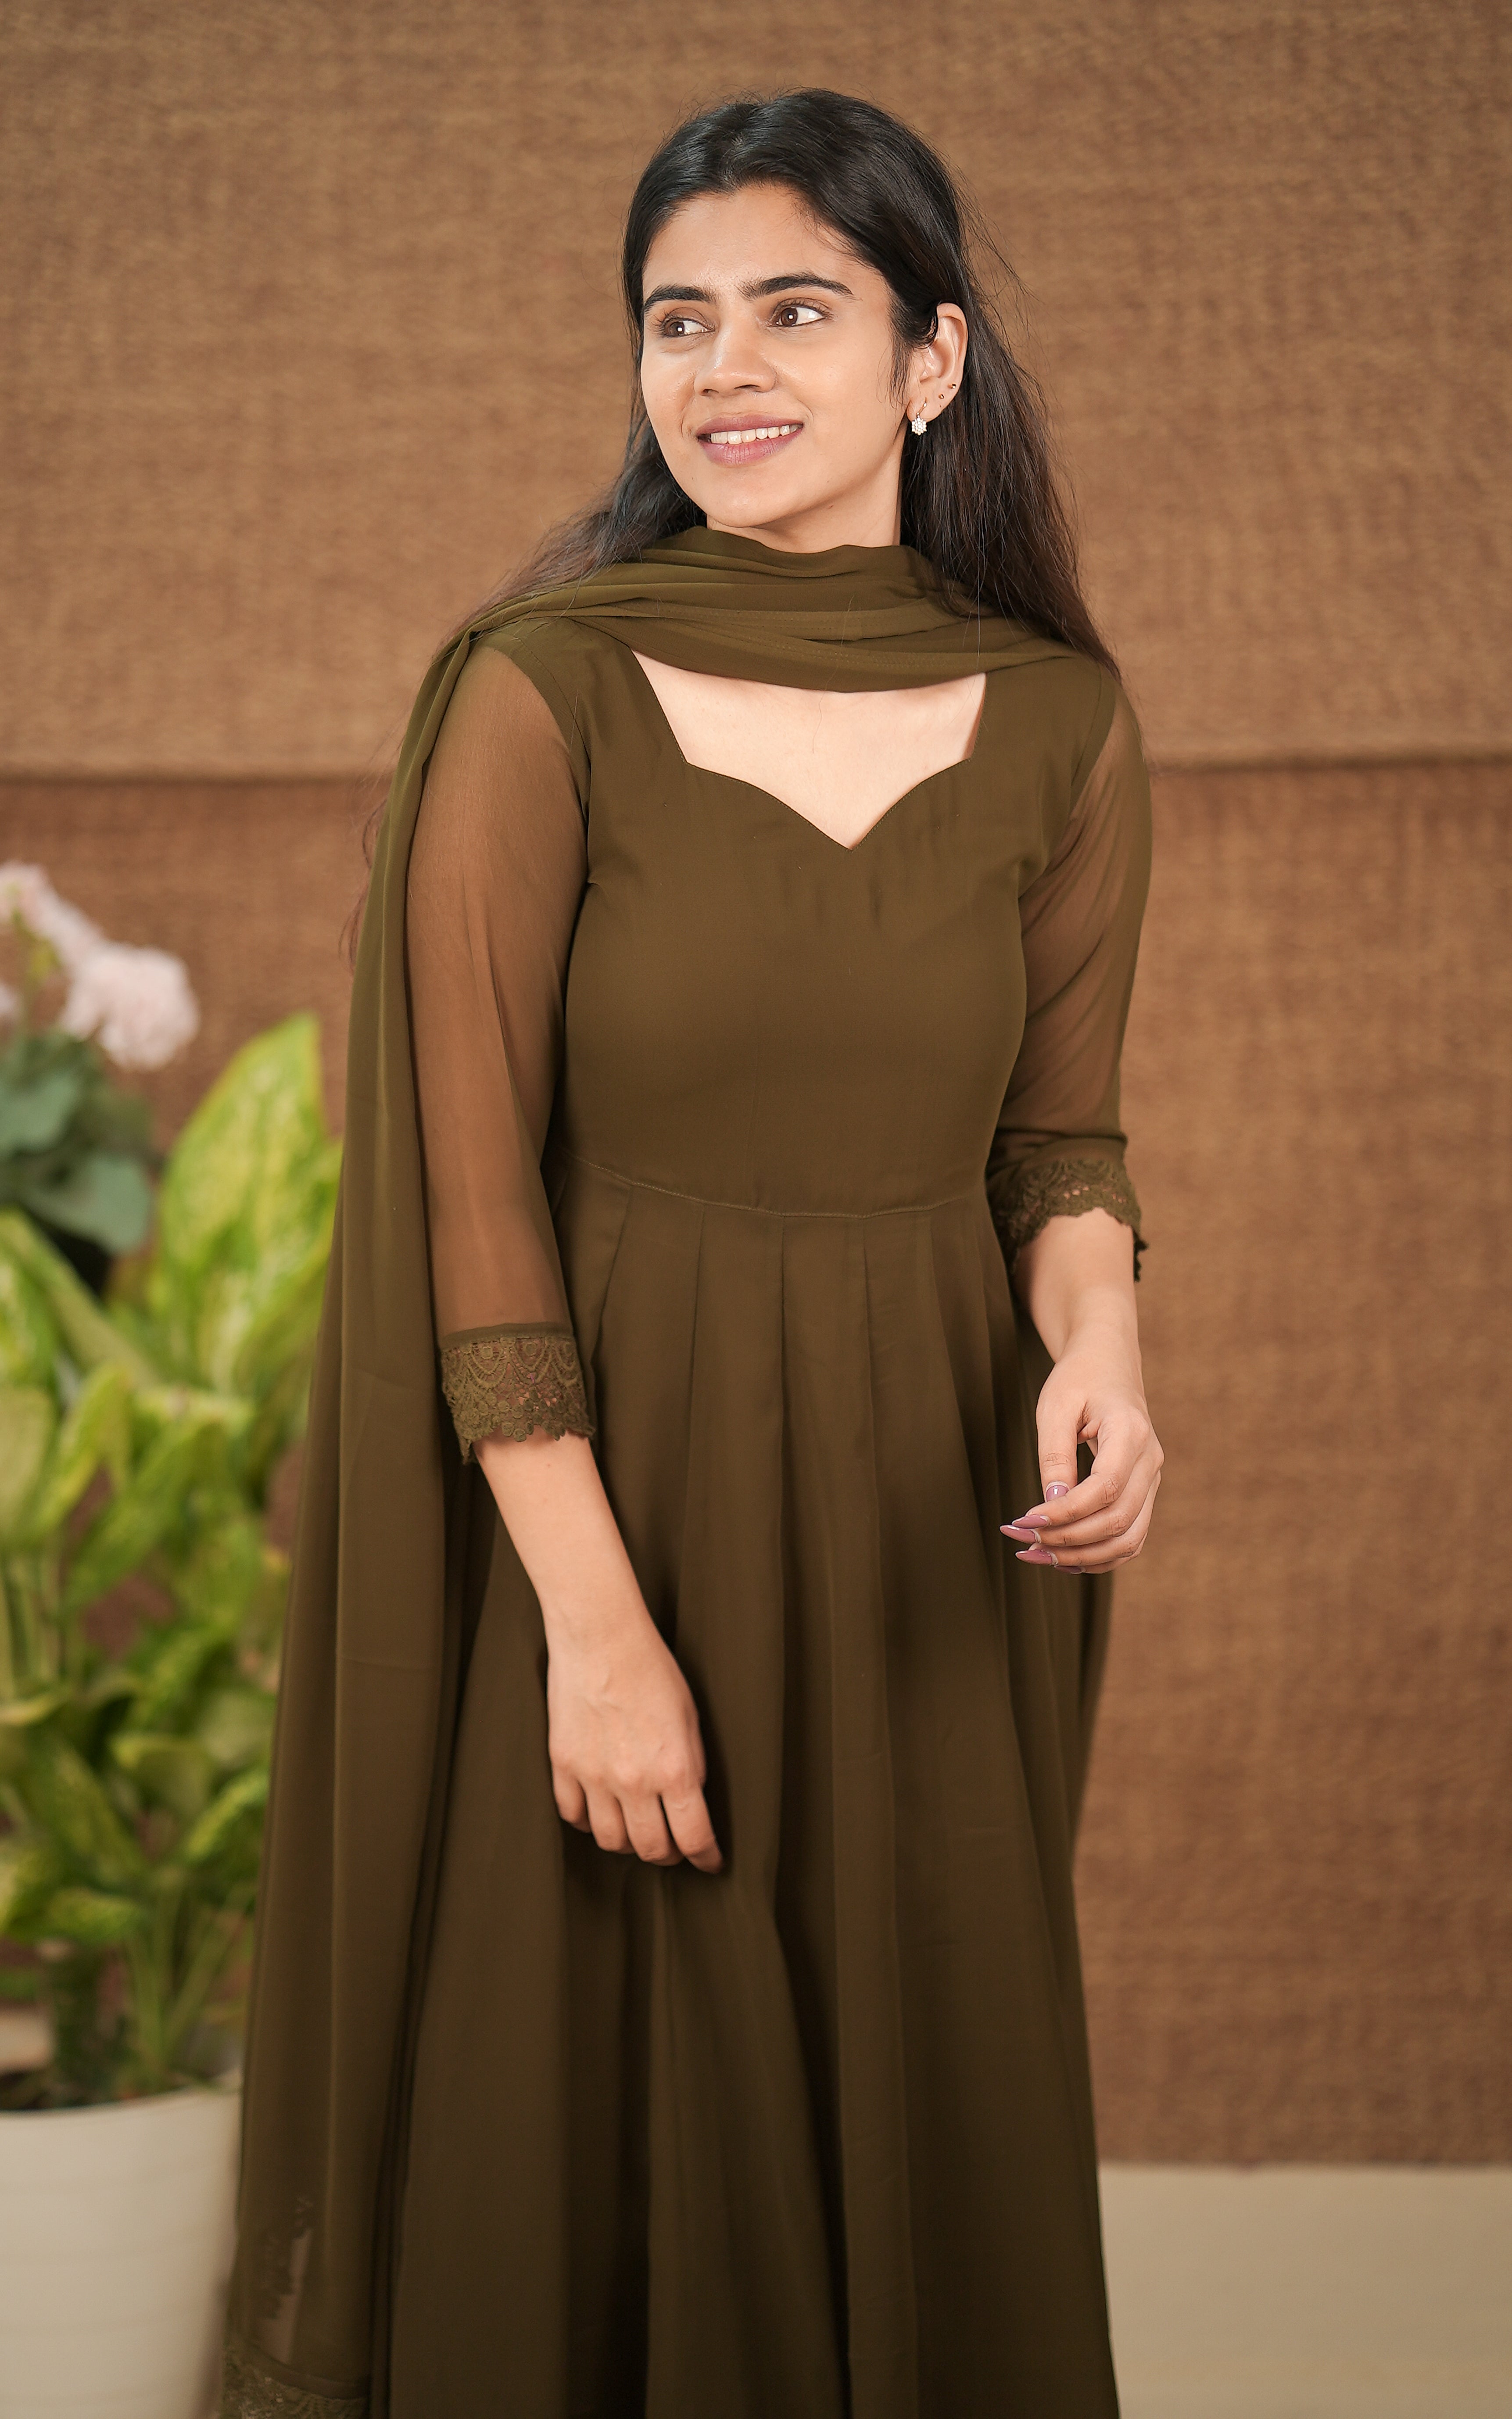 instore kurti melodic dark olive green (kurti+dupatta) georgette with butter crepe lining full flared anarkali with crochet lace border color: dark olive green 